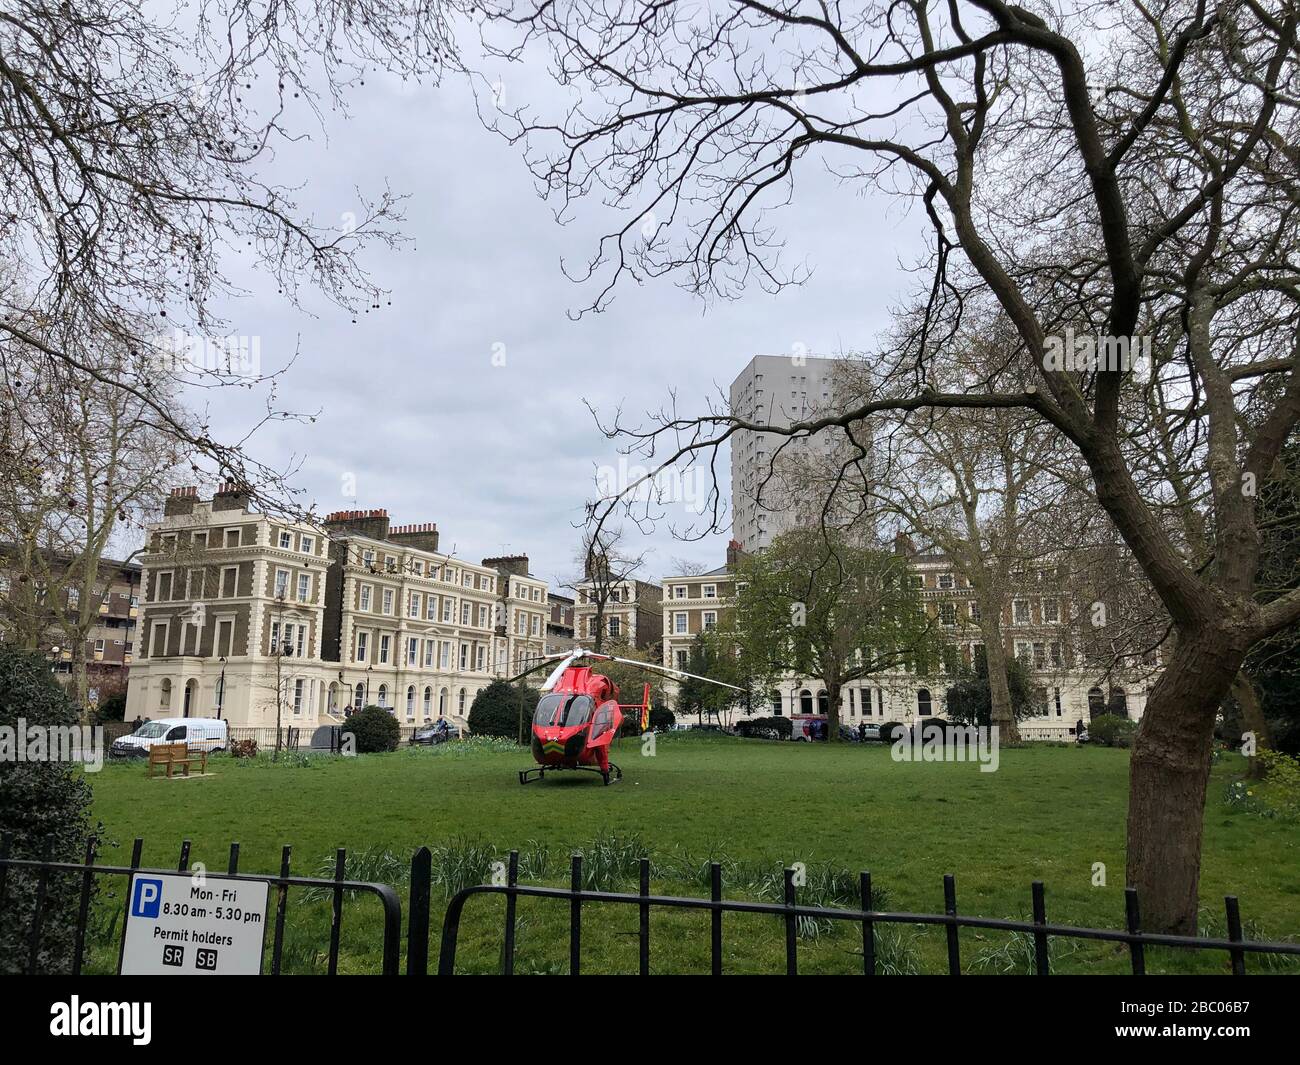 London, UK. 1st April 2020. London's air ambulance G-LNDN helicopter lands in Albert Square green area. Stock Photo